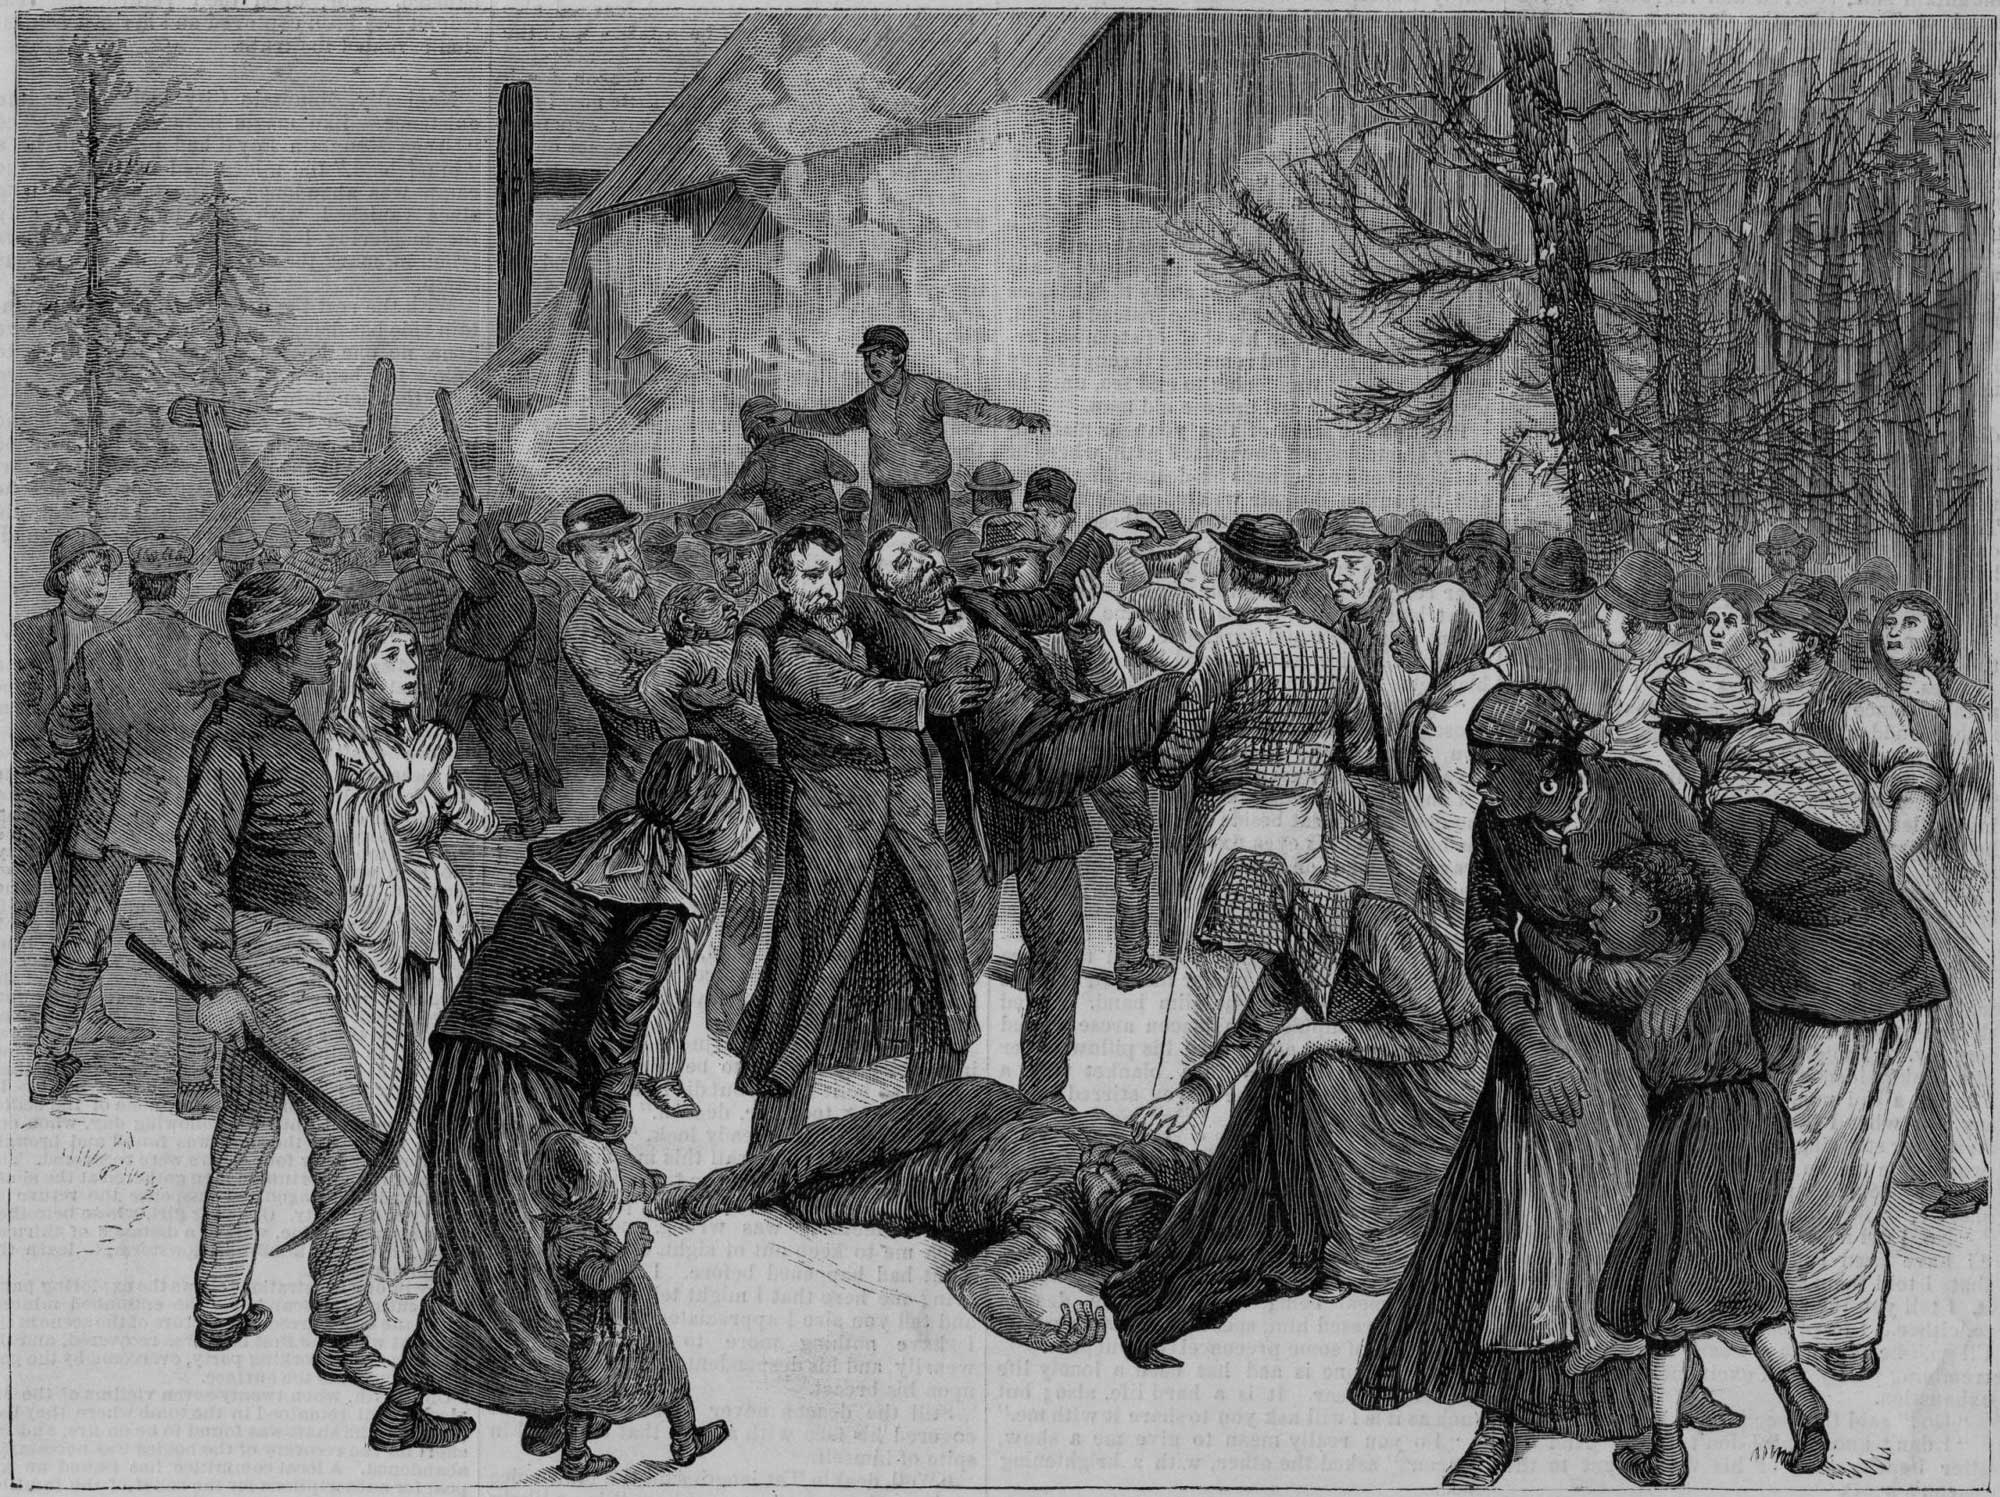 An illustration showing families and rescuers outside of the Grove Shaft, where an explosion took place in a coal mine in 1882.